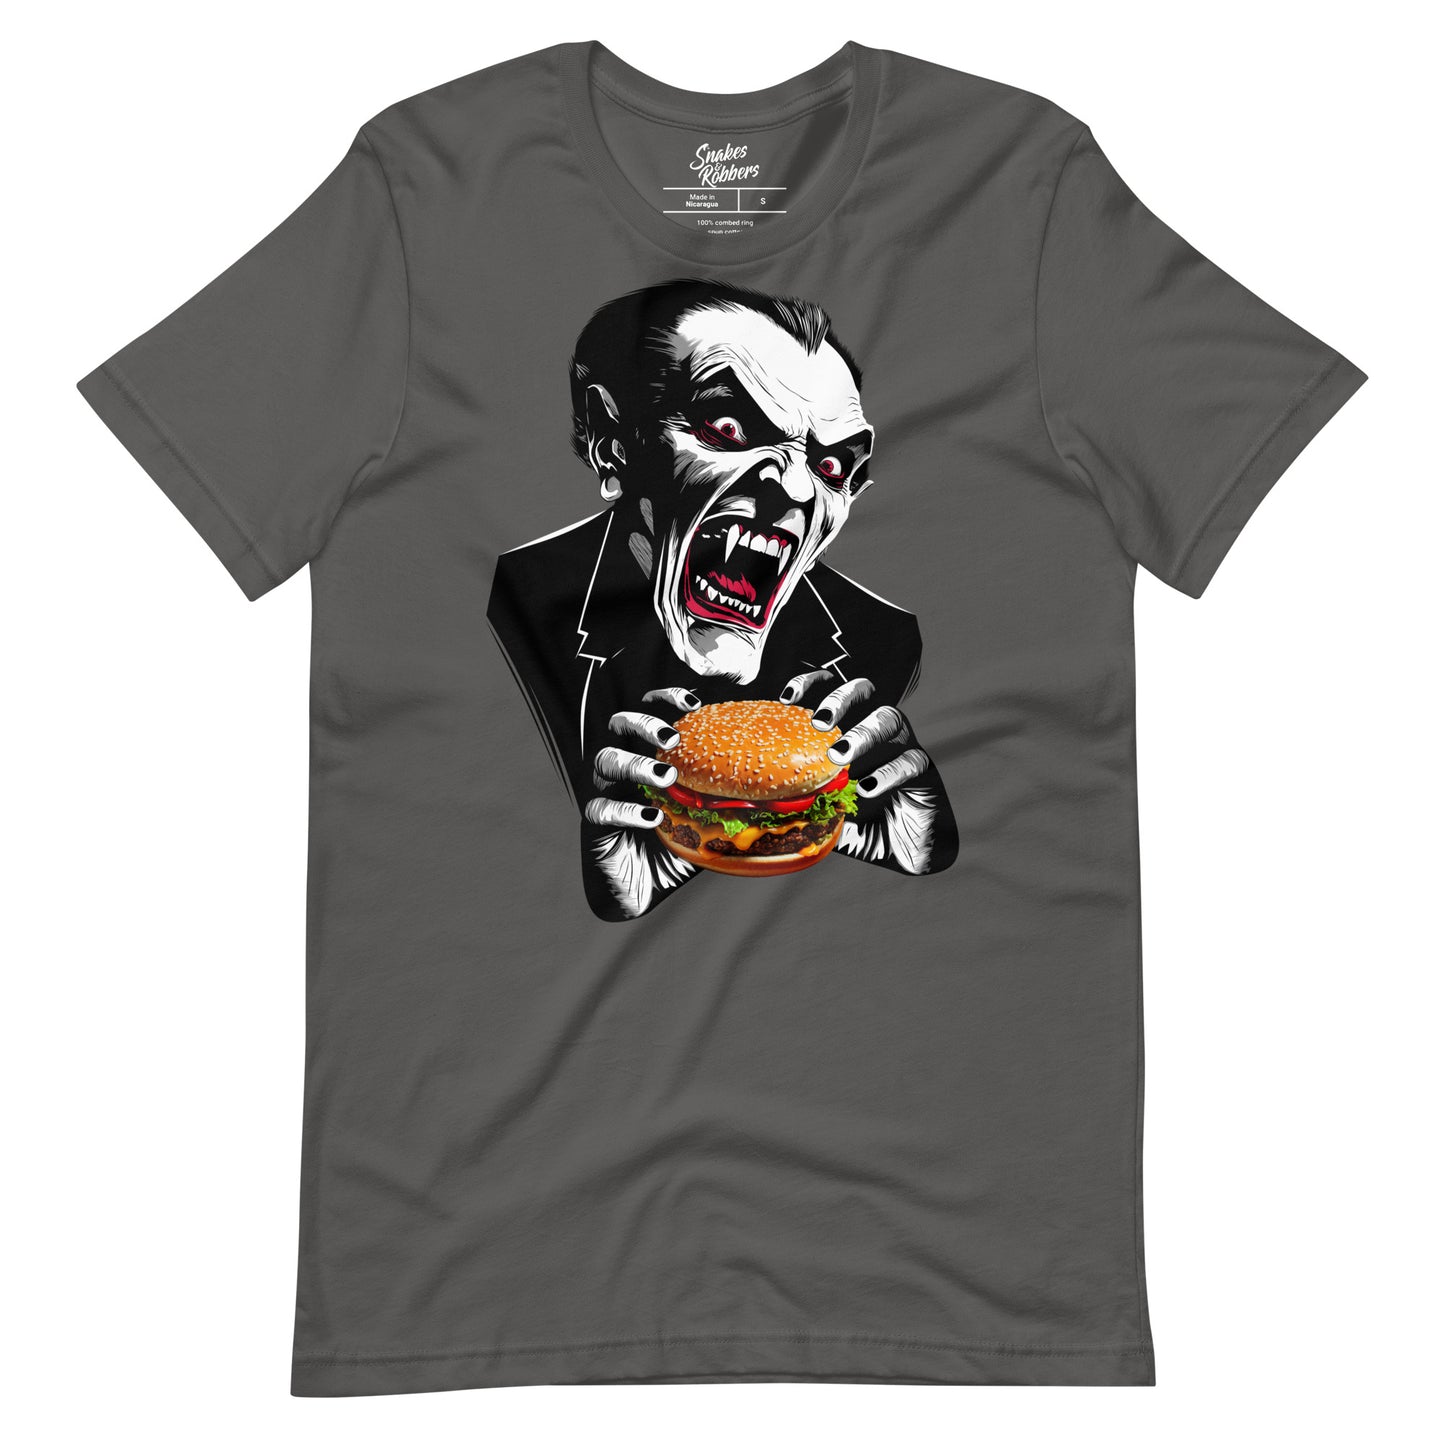 Count Cheese Burger Unisex Retail Fit T-Shirt